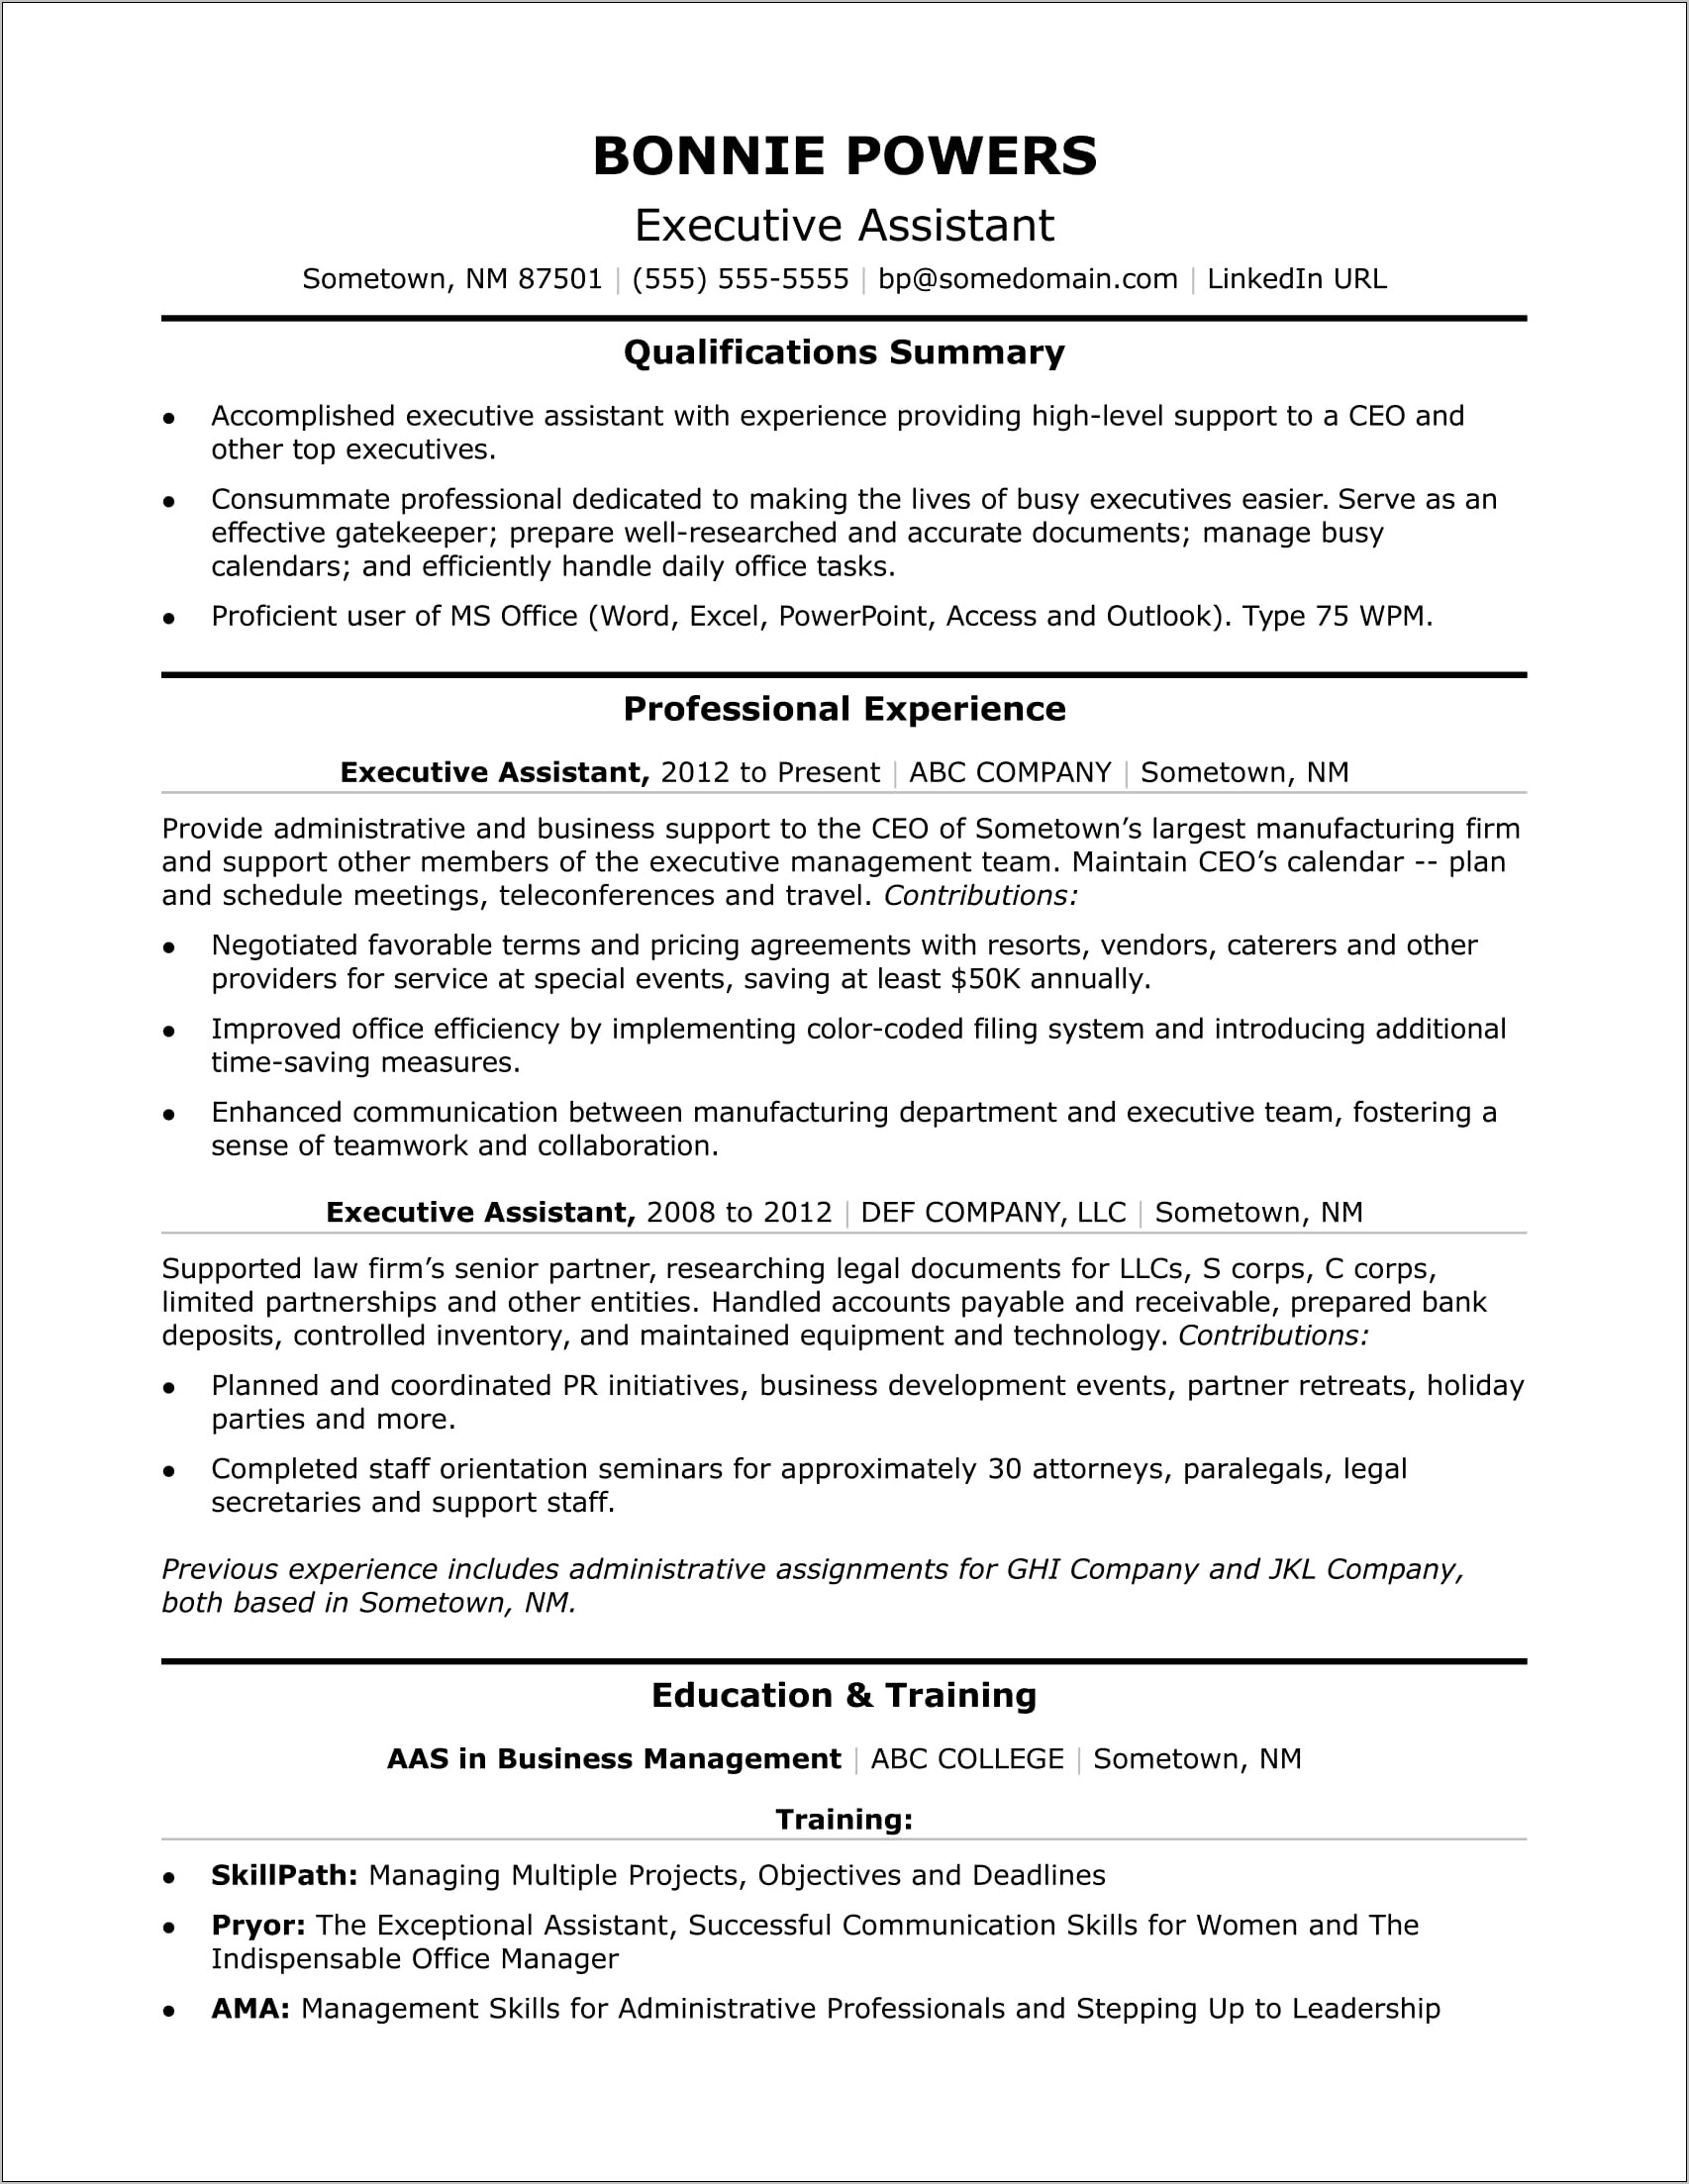 Resume Objective For A Administrative Assistant